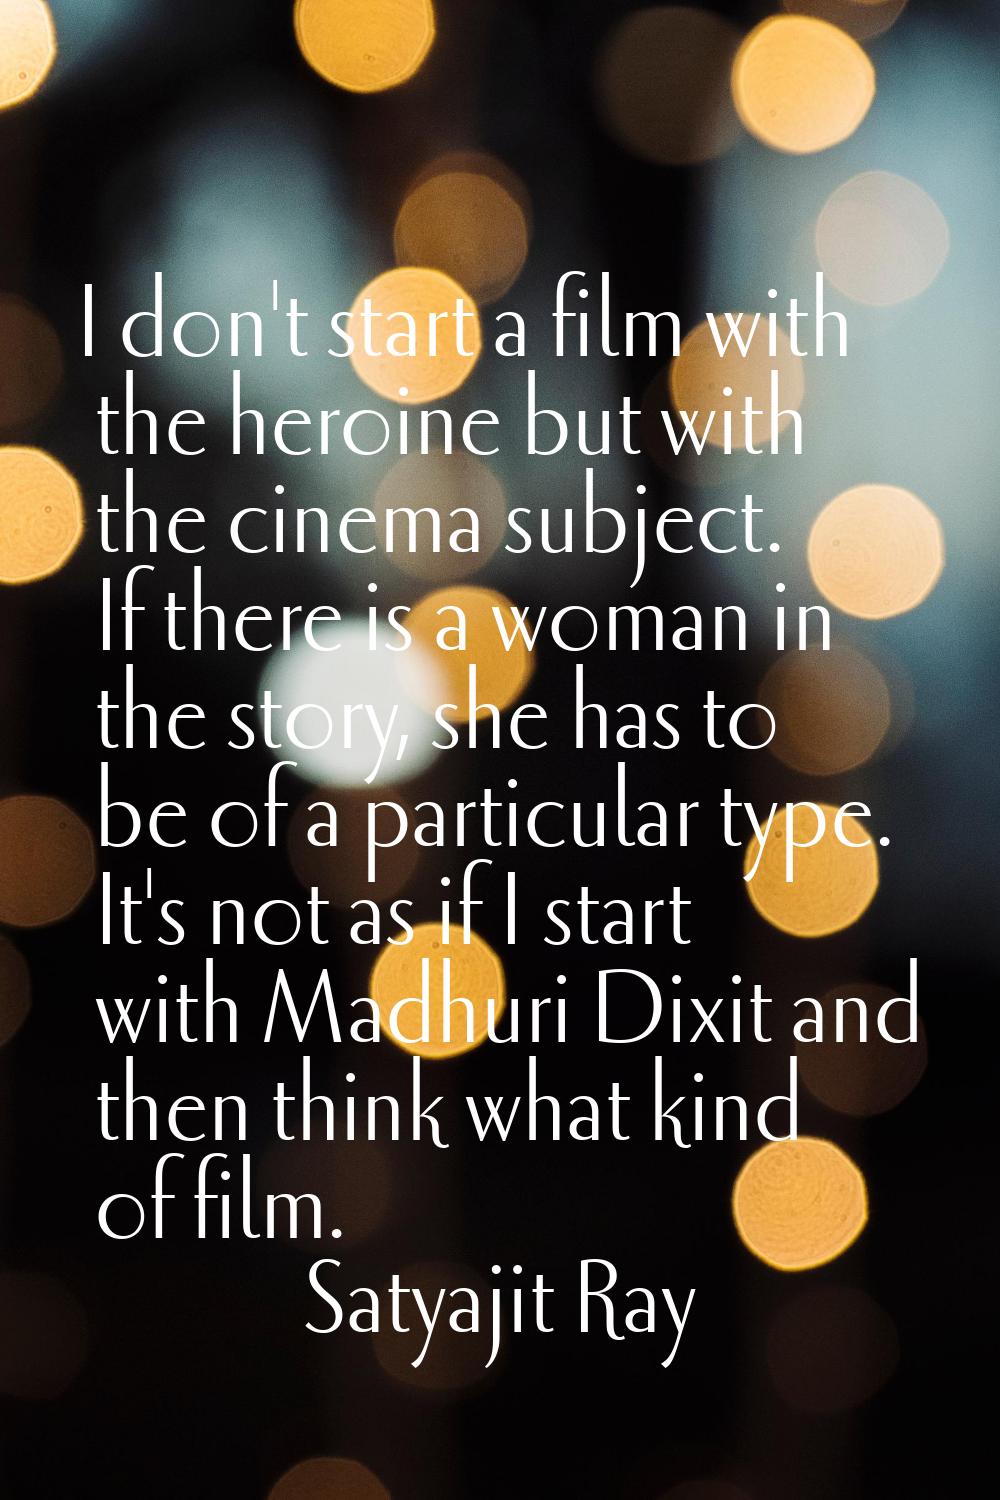 I don't start a film with the heroine but with the cinema subject. If there is a woman in the story